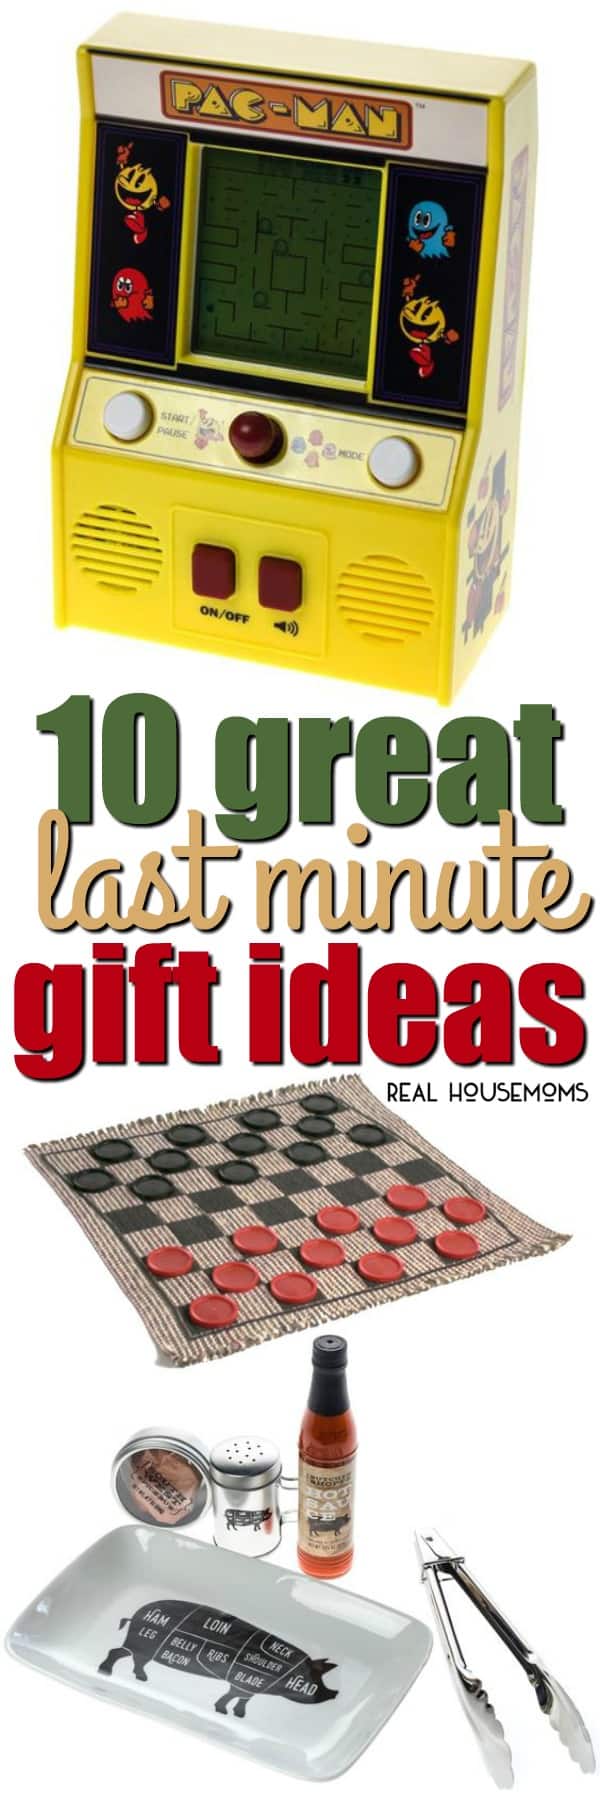 Christmas is just around the corner! If you're like me, there are still a few names to cross off your Christmas gift list, but don't fret! I'm sharing 10 of my favorite Great Last Minute Gift Ideas to help find the perfect present!